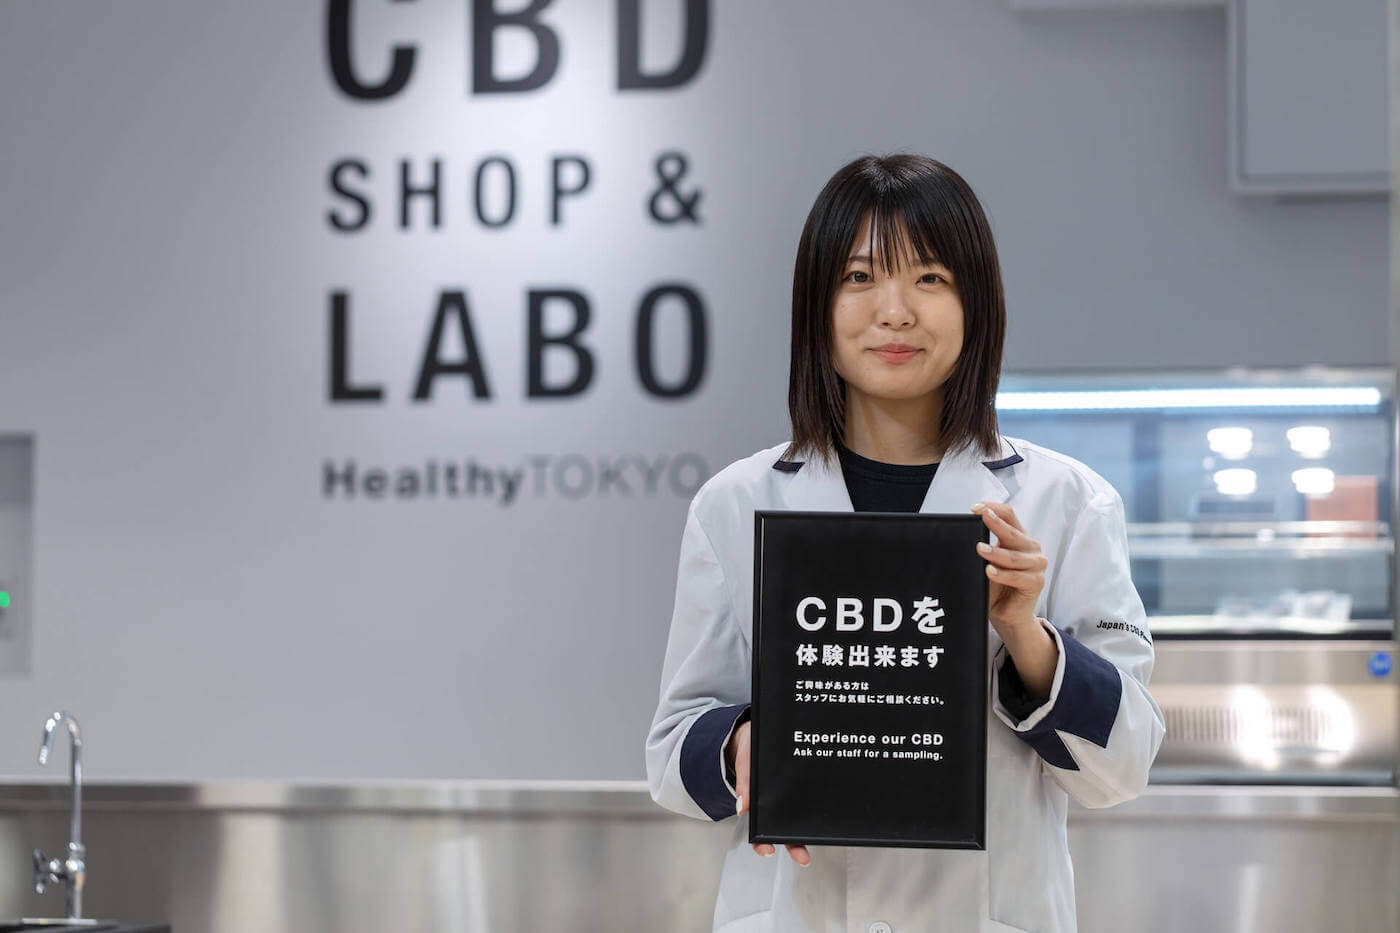 Store Image 2 - staff with board: try CBD